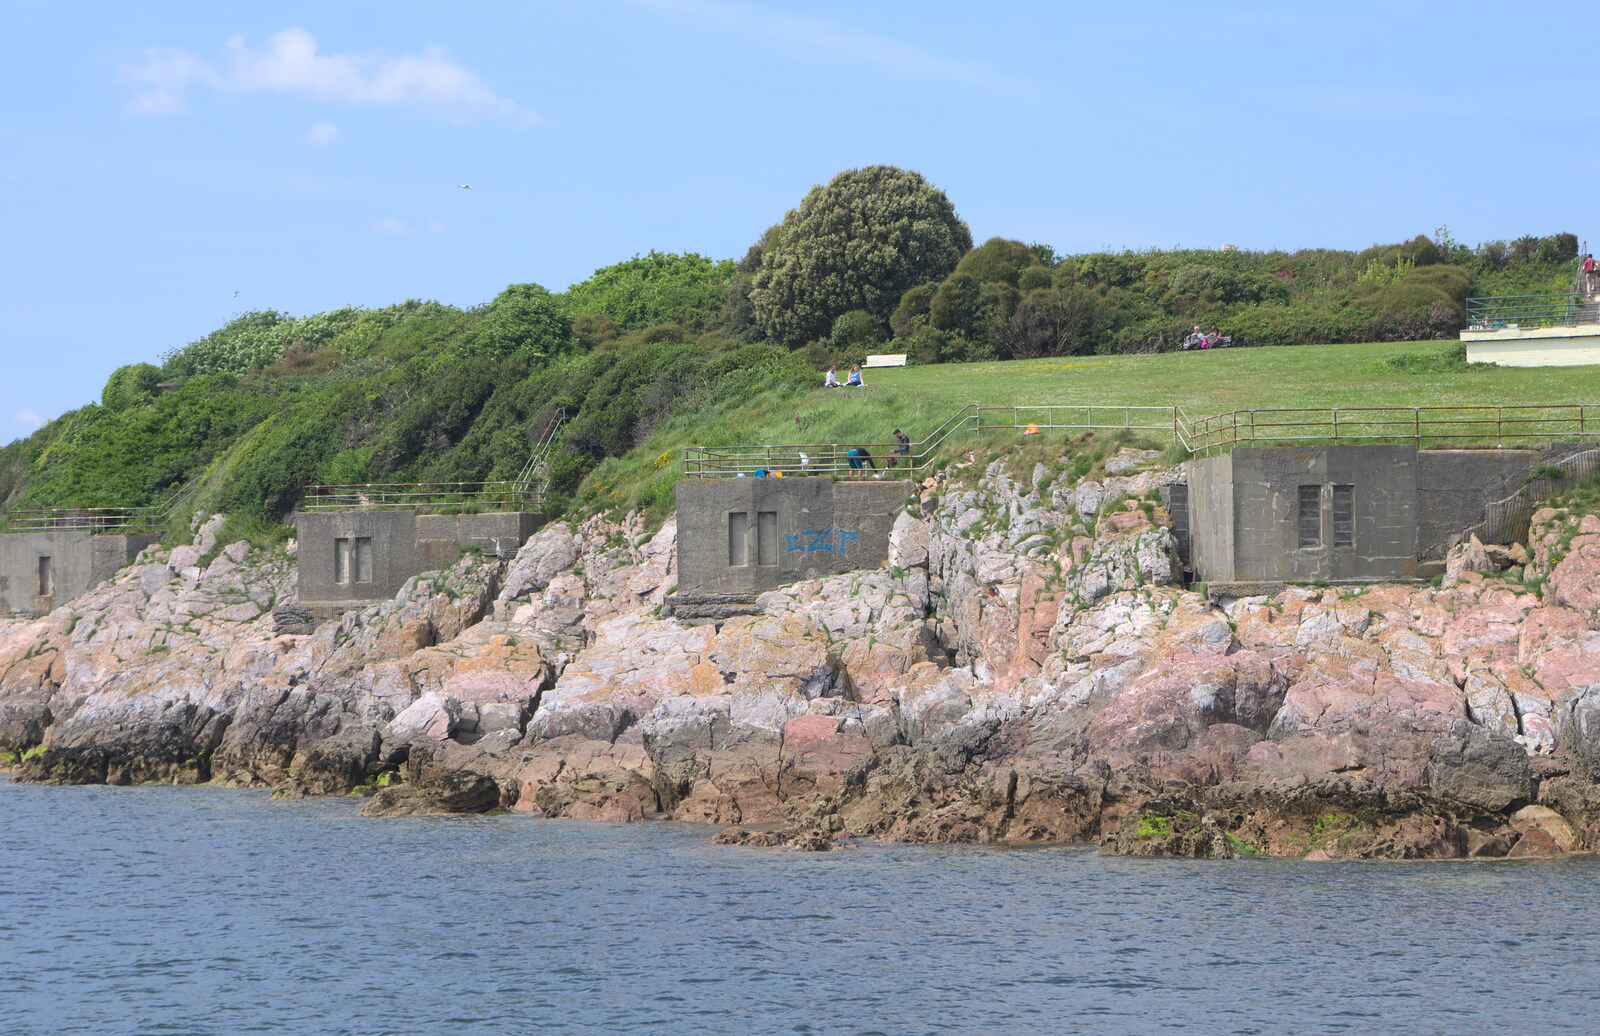 Former wartime gun emplacements from A Tamar River Trip, Plymouth, Devon - 30th May 2016